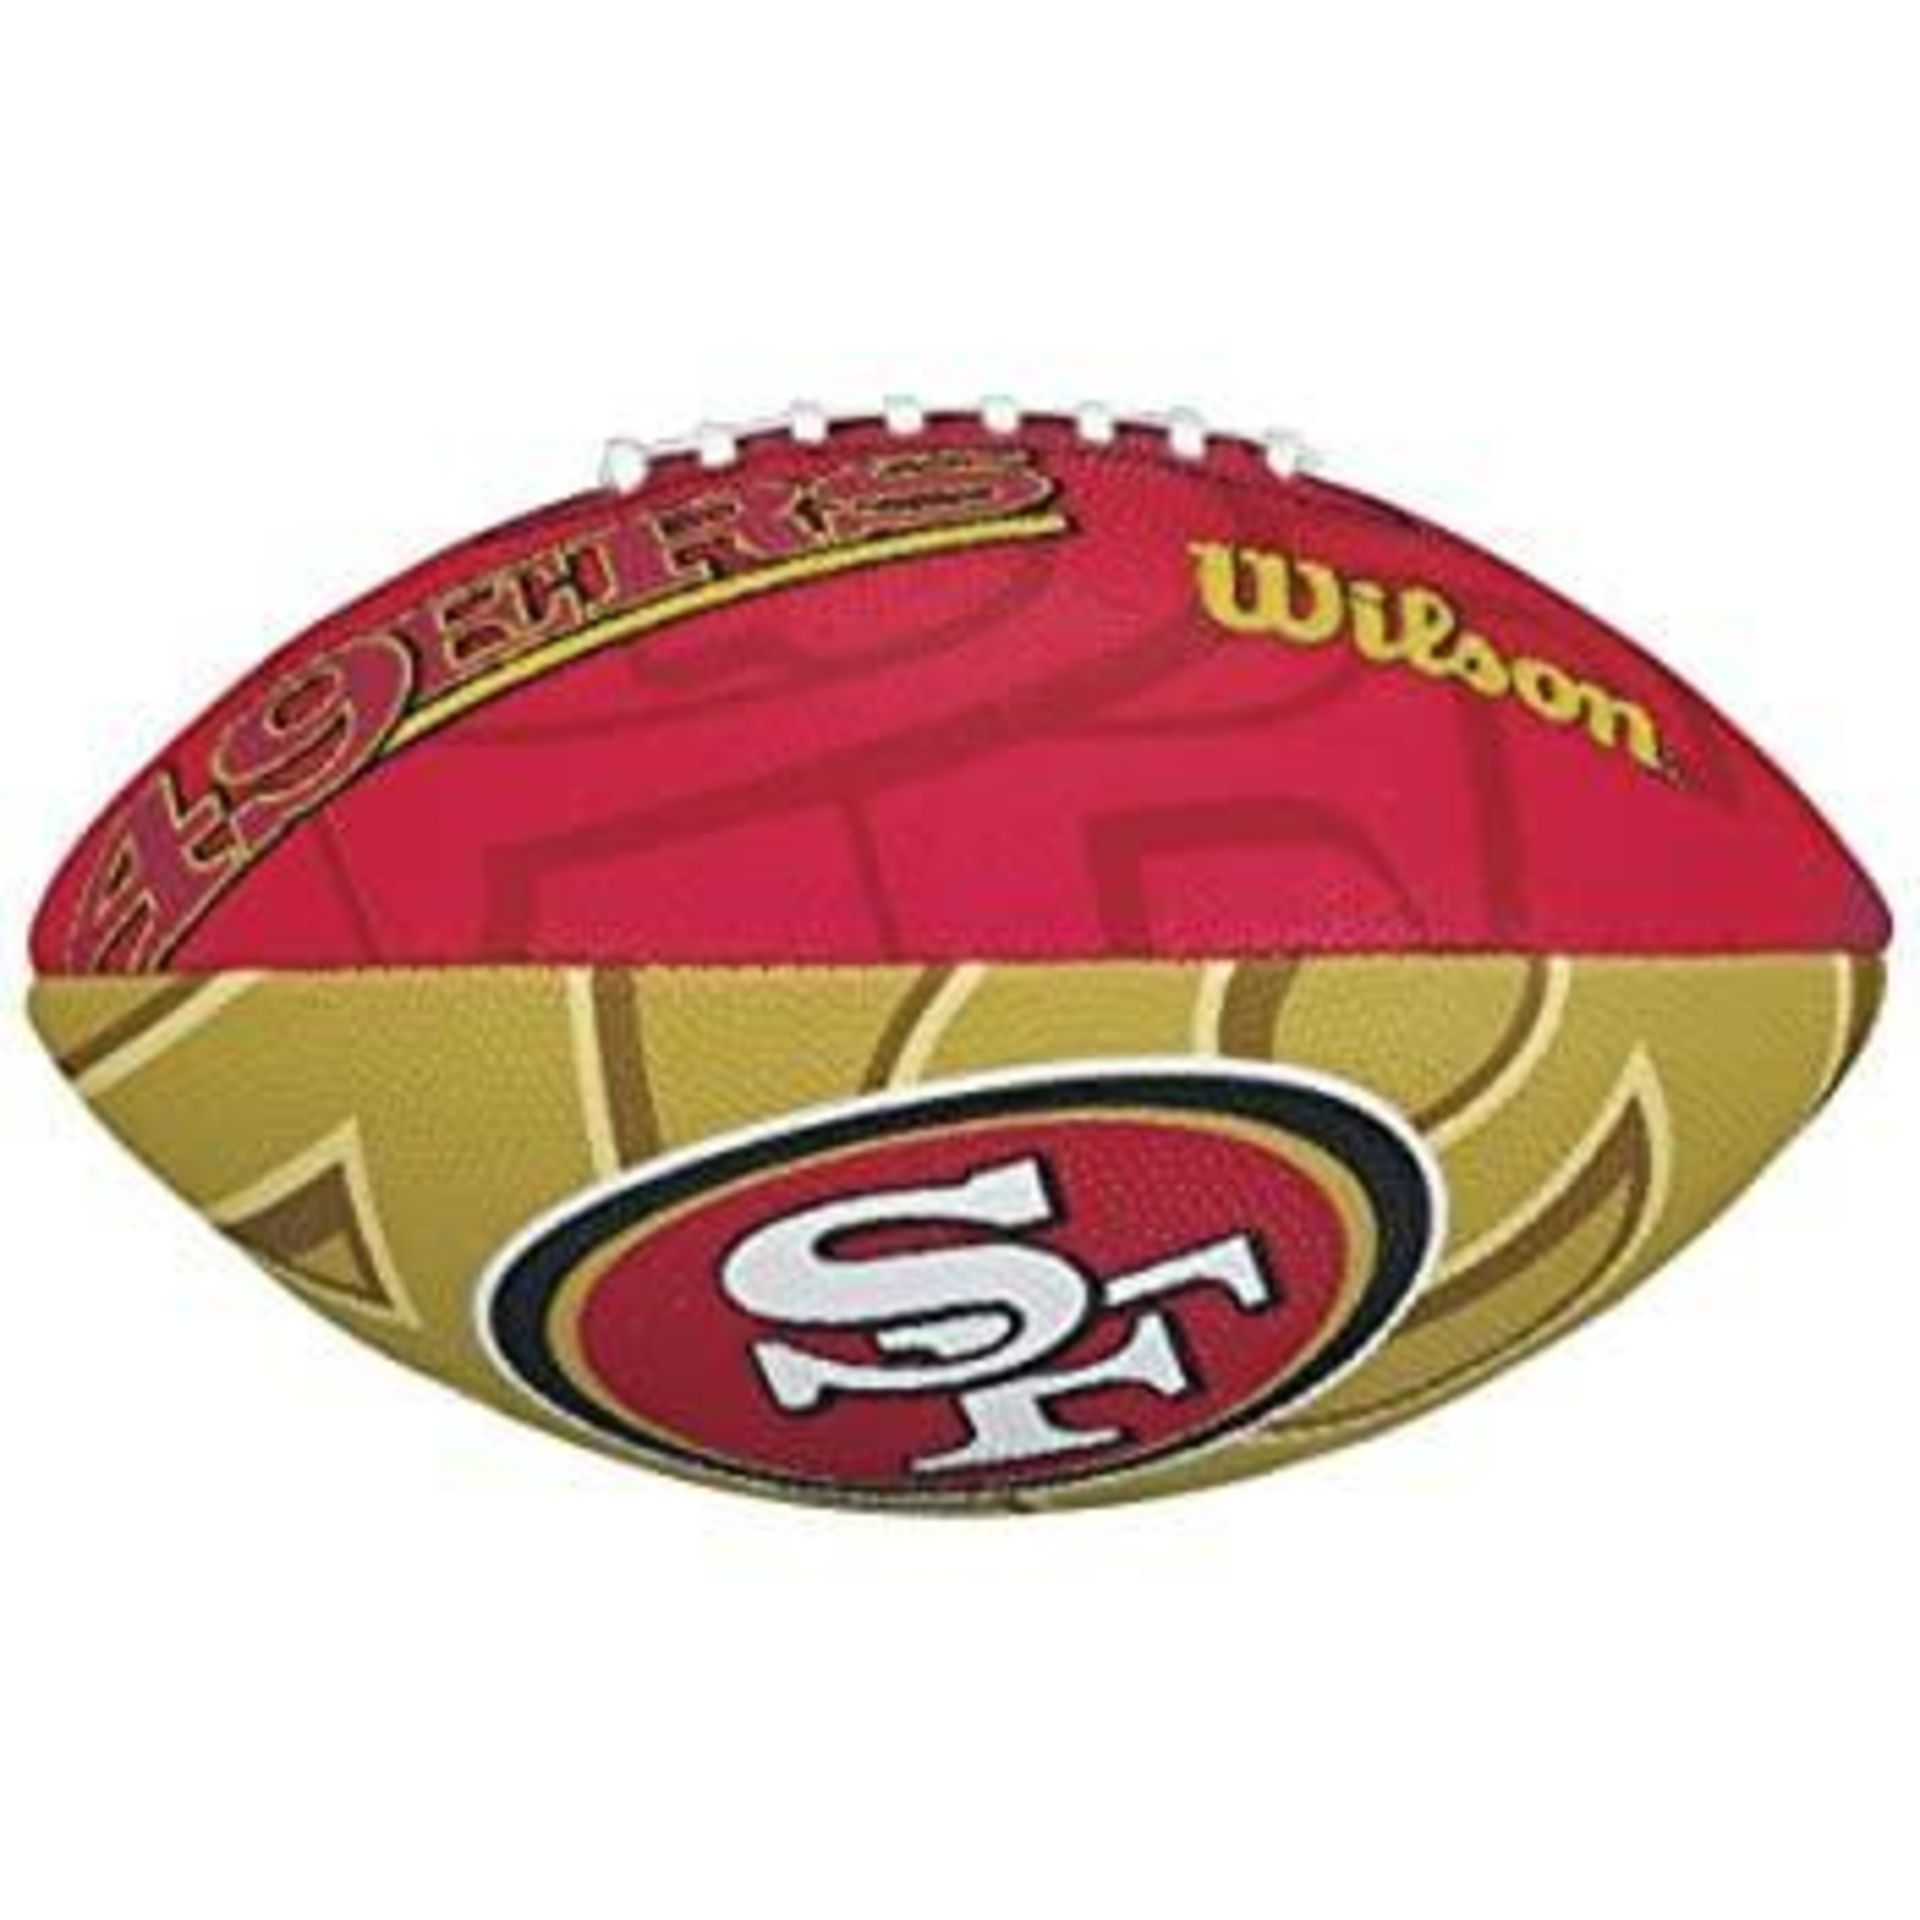 Wilson Unisex-Youth Mini NFL Team Soft Touch American Football